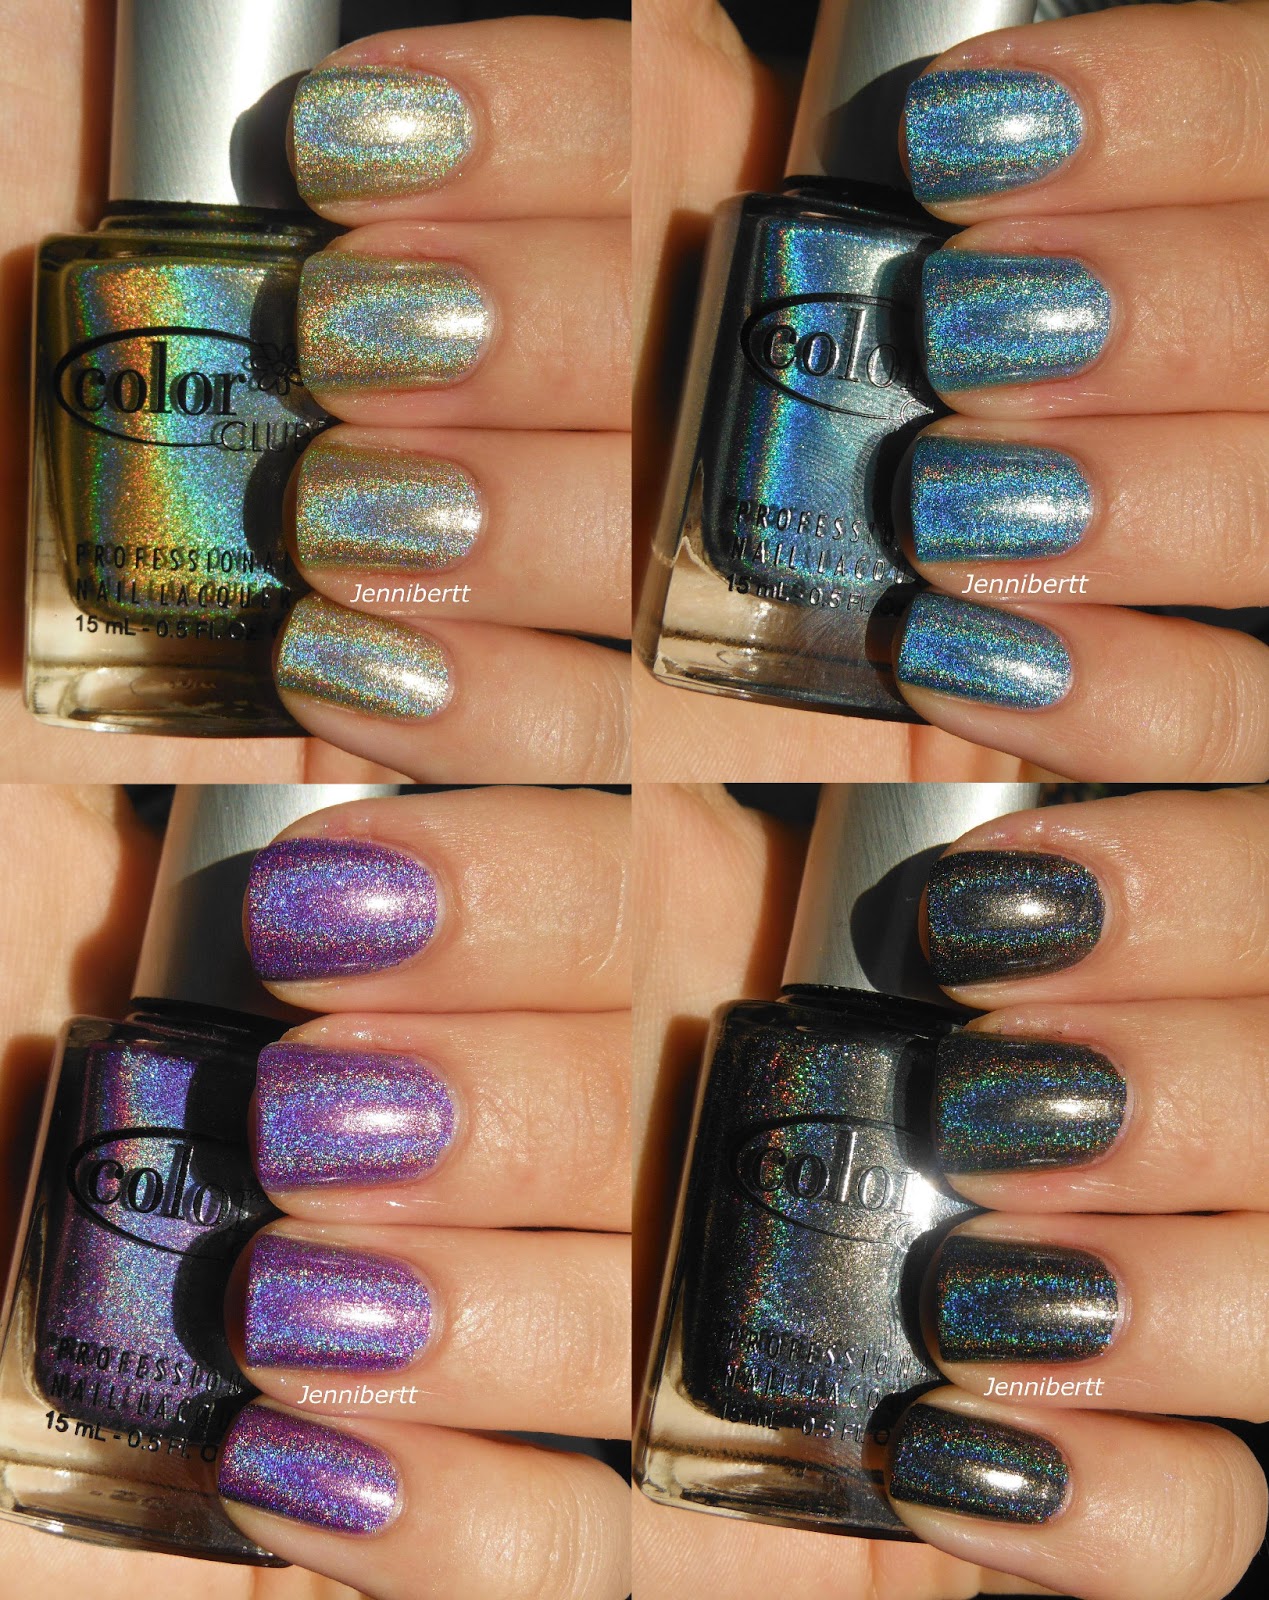 Jennibertt's Nails Halo Hues Swatches Part 2 and Comparisons